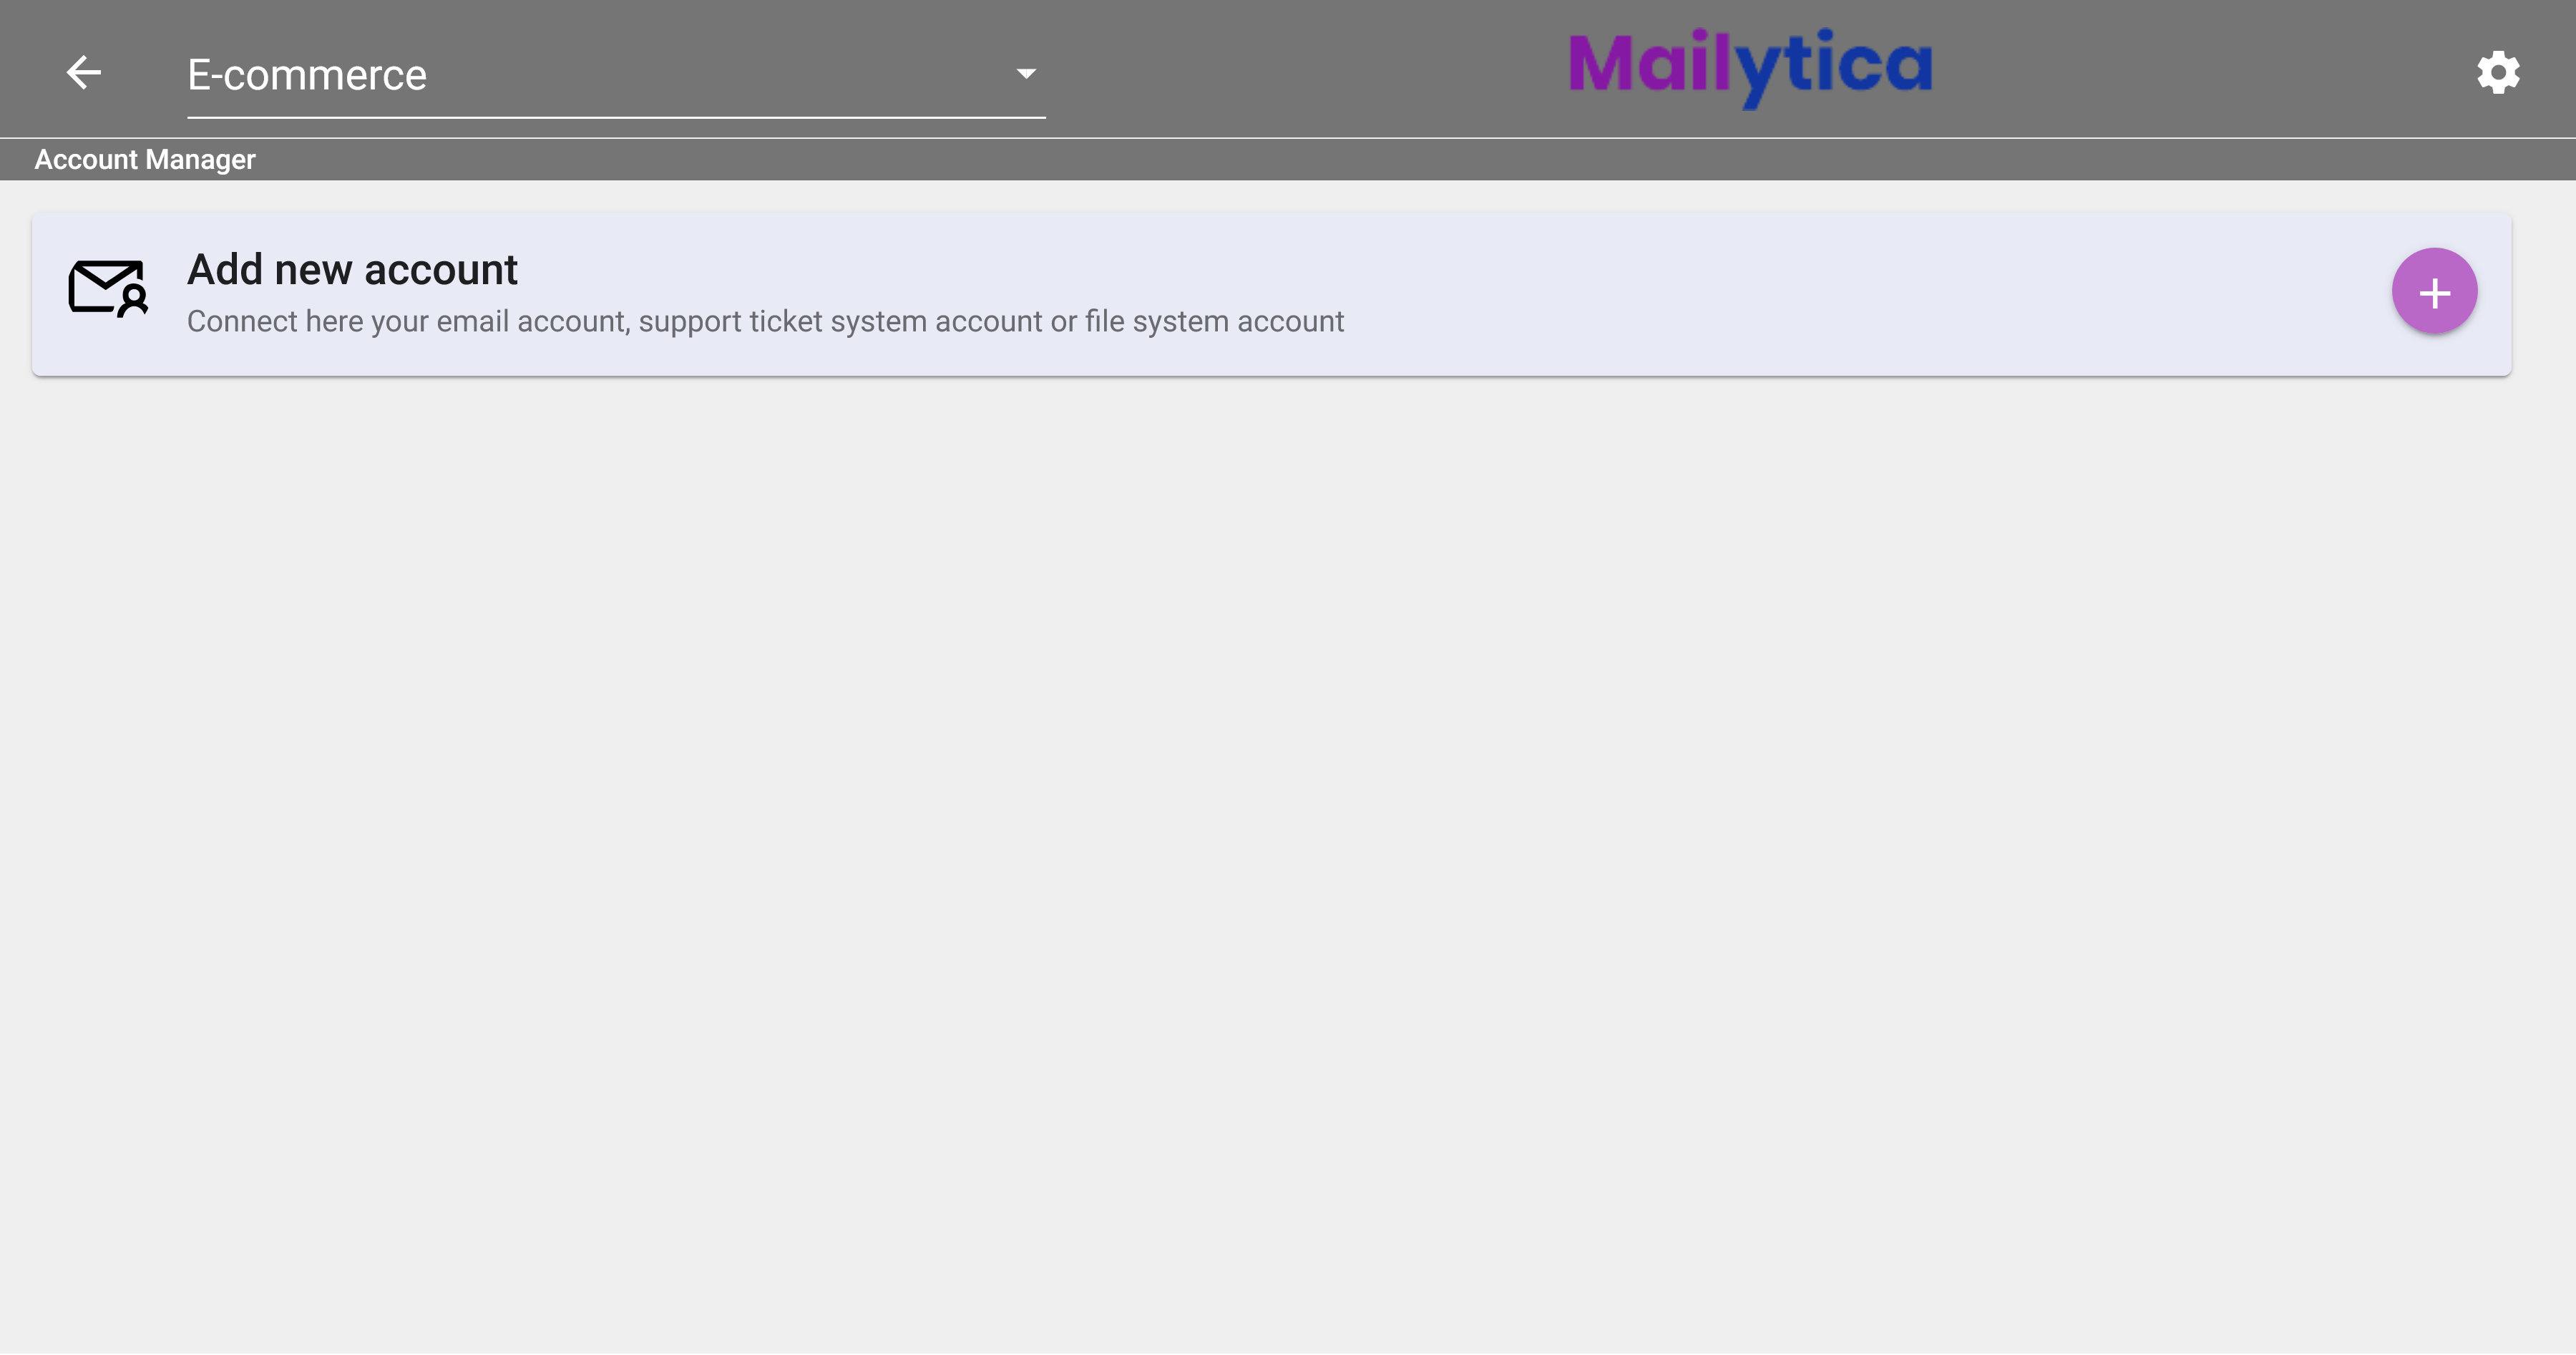 Account Manager screen